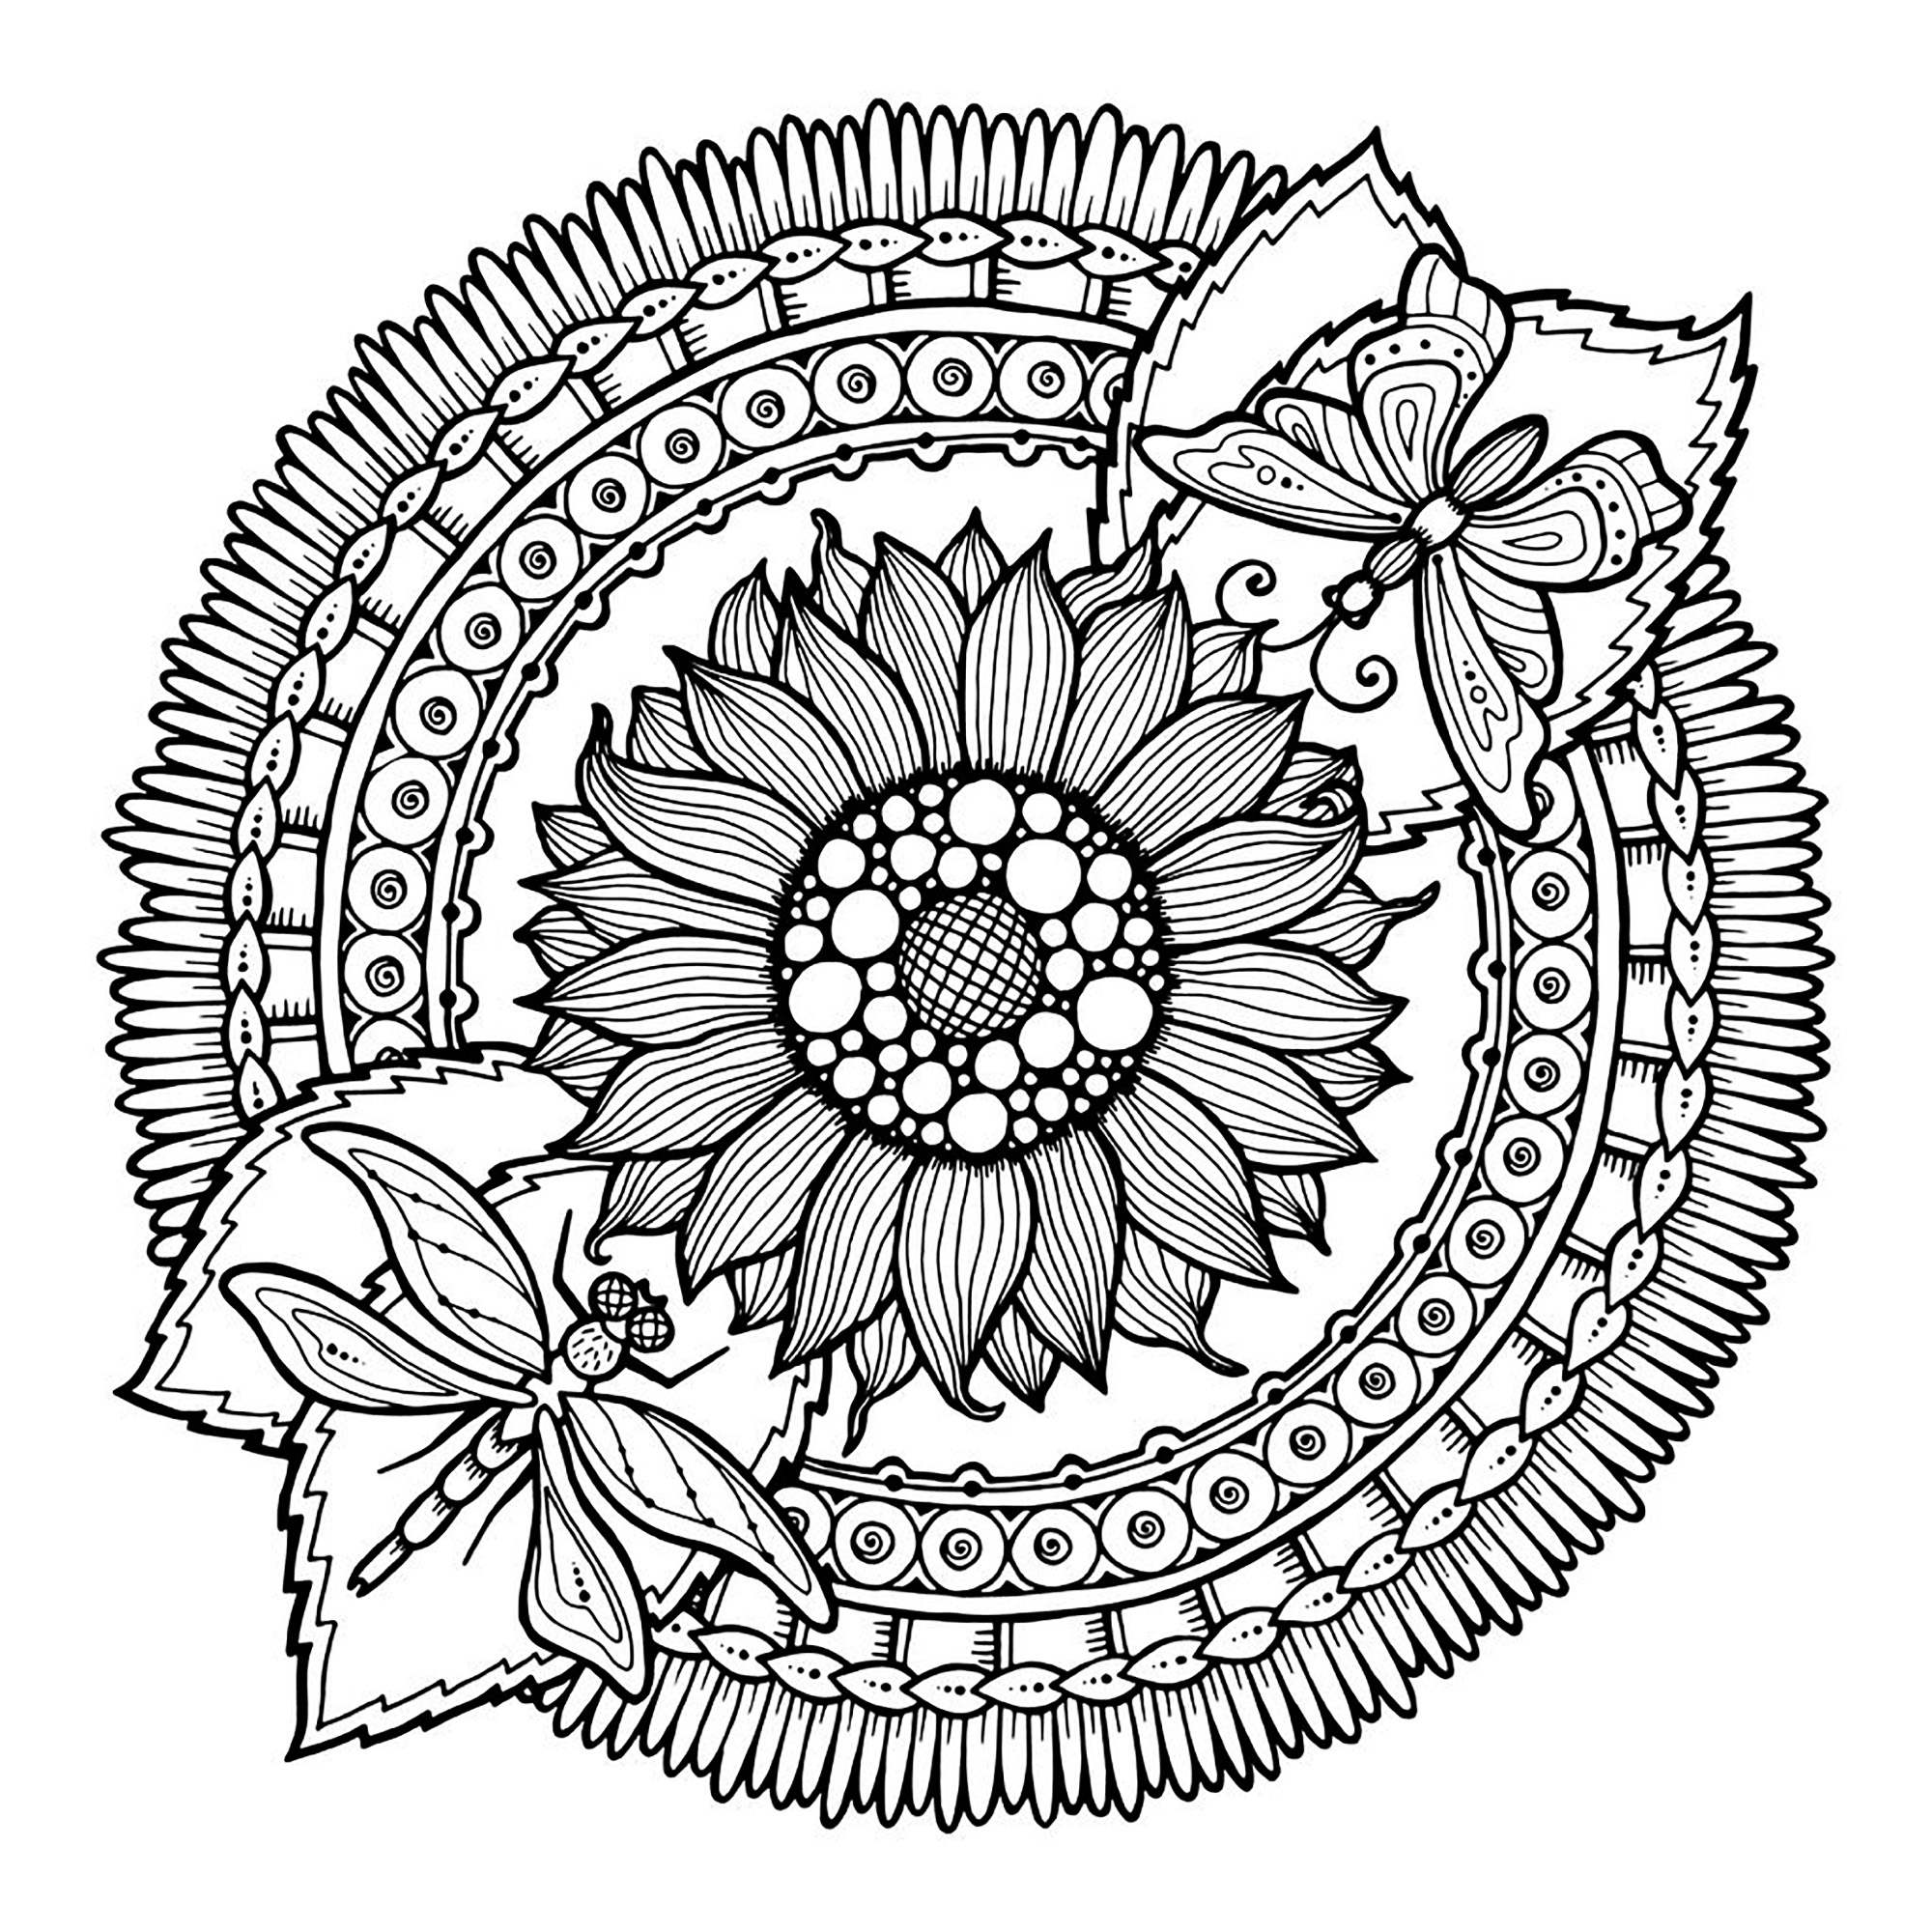 Mandalas Coloring Pages For Adults Coloring Pages Adults Mandala